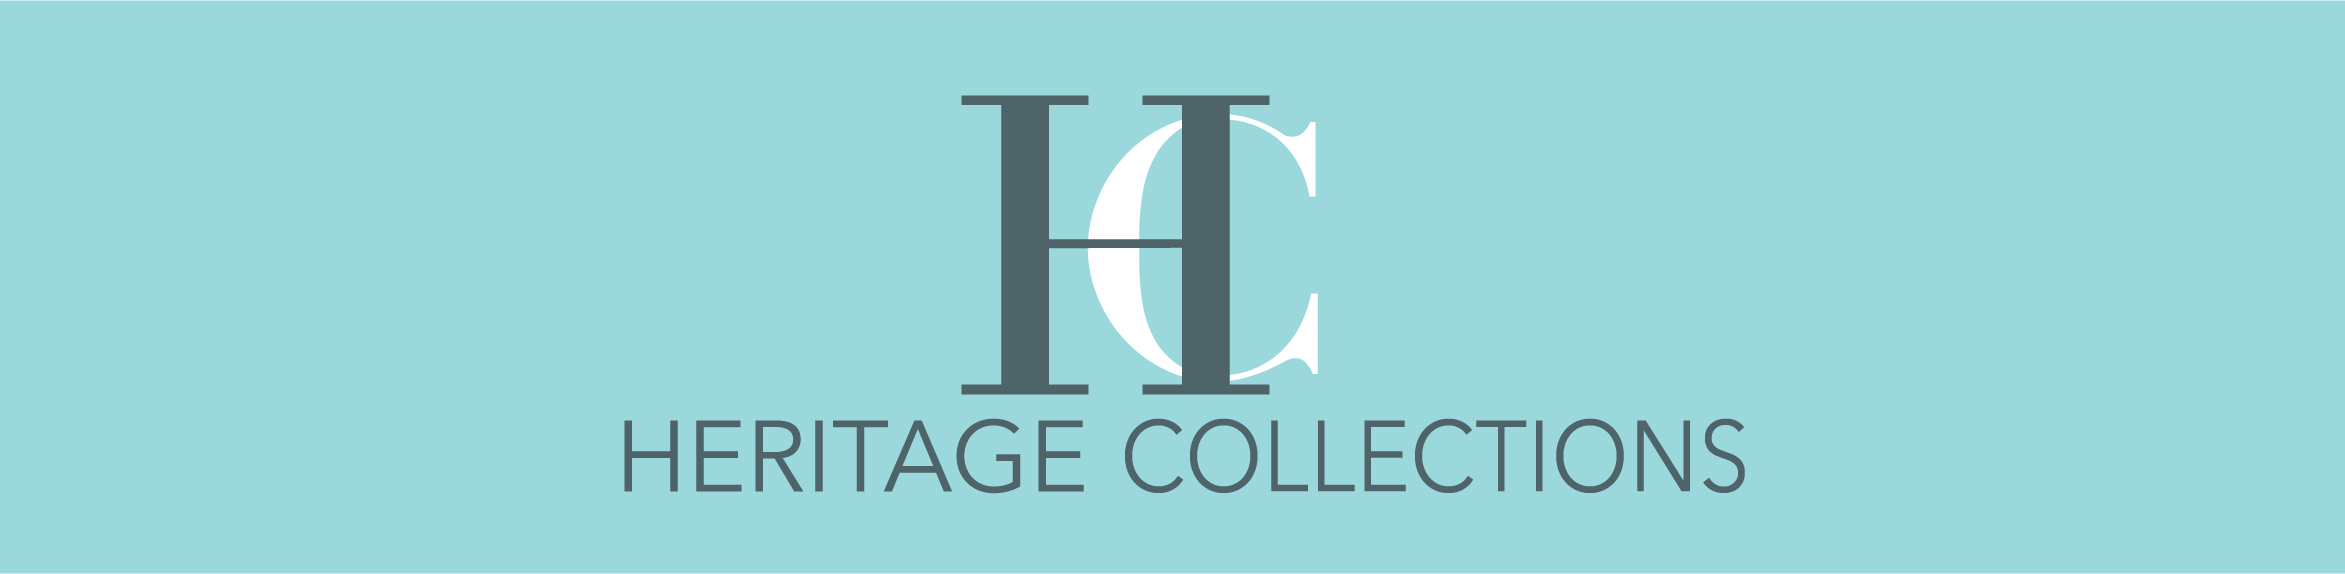 The Heritage Collections